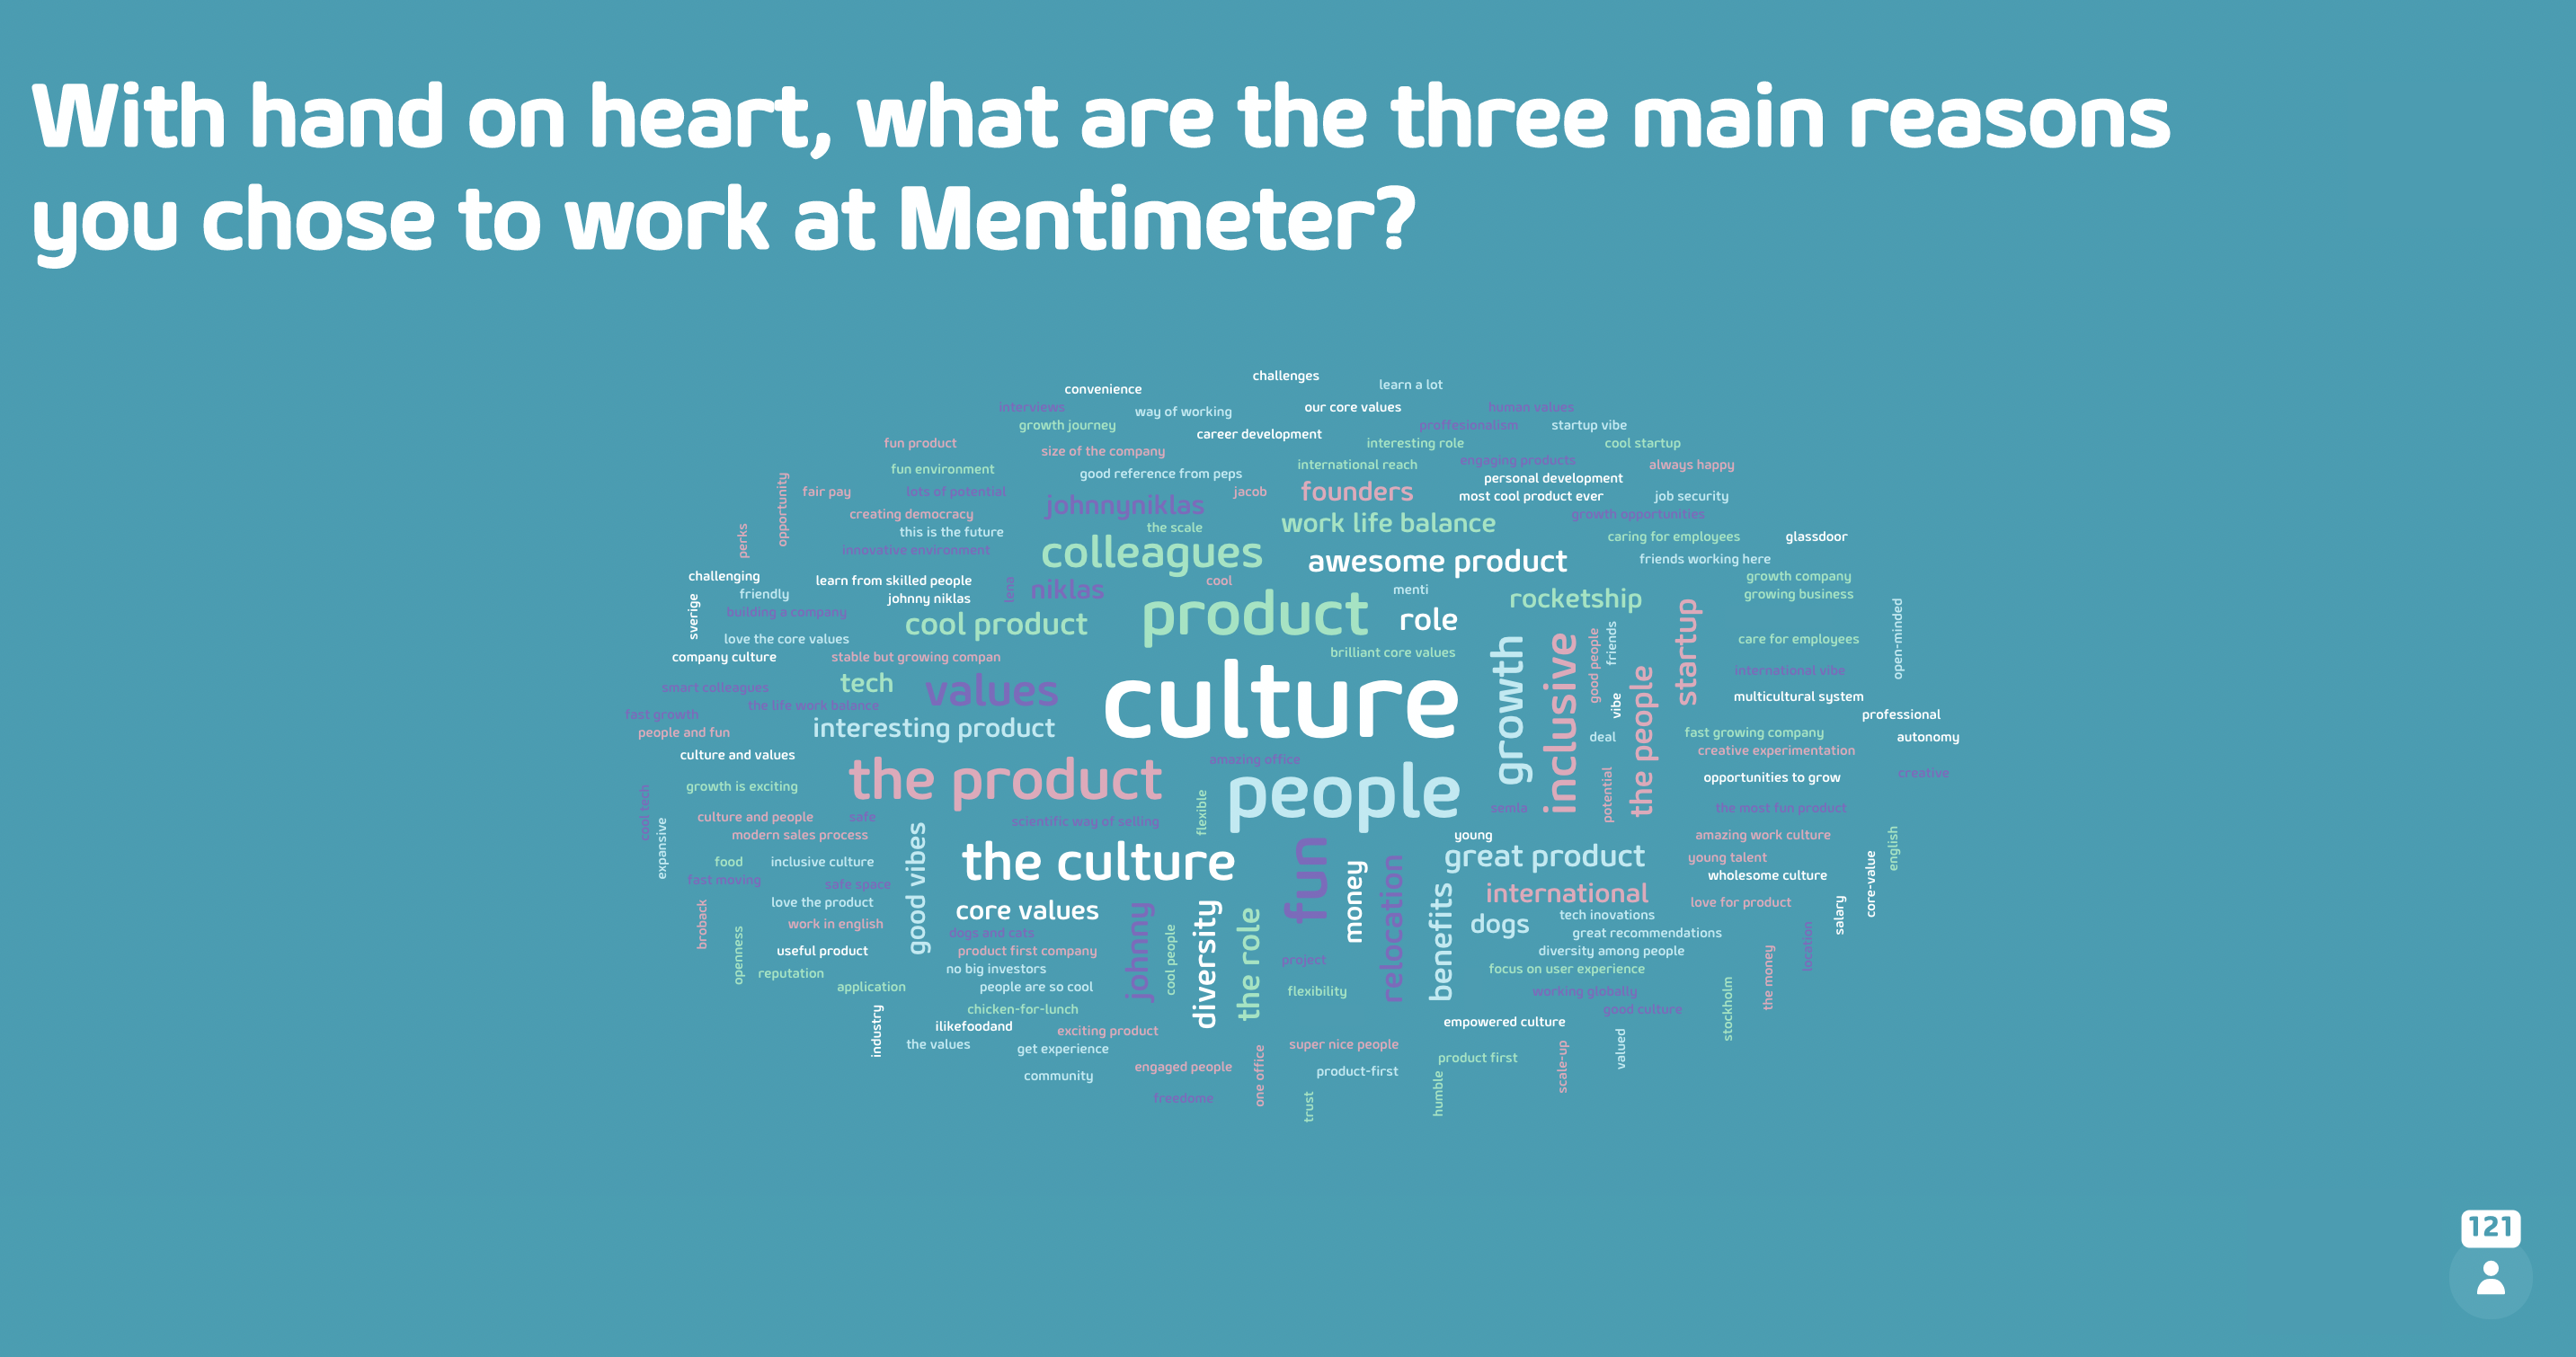 Word cloud - With hand on heart, what are the three main reasons you chose to work at Mentimeter